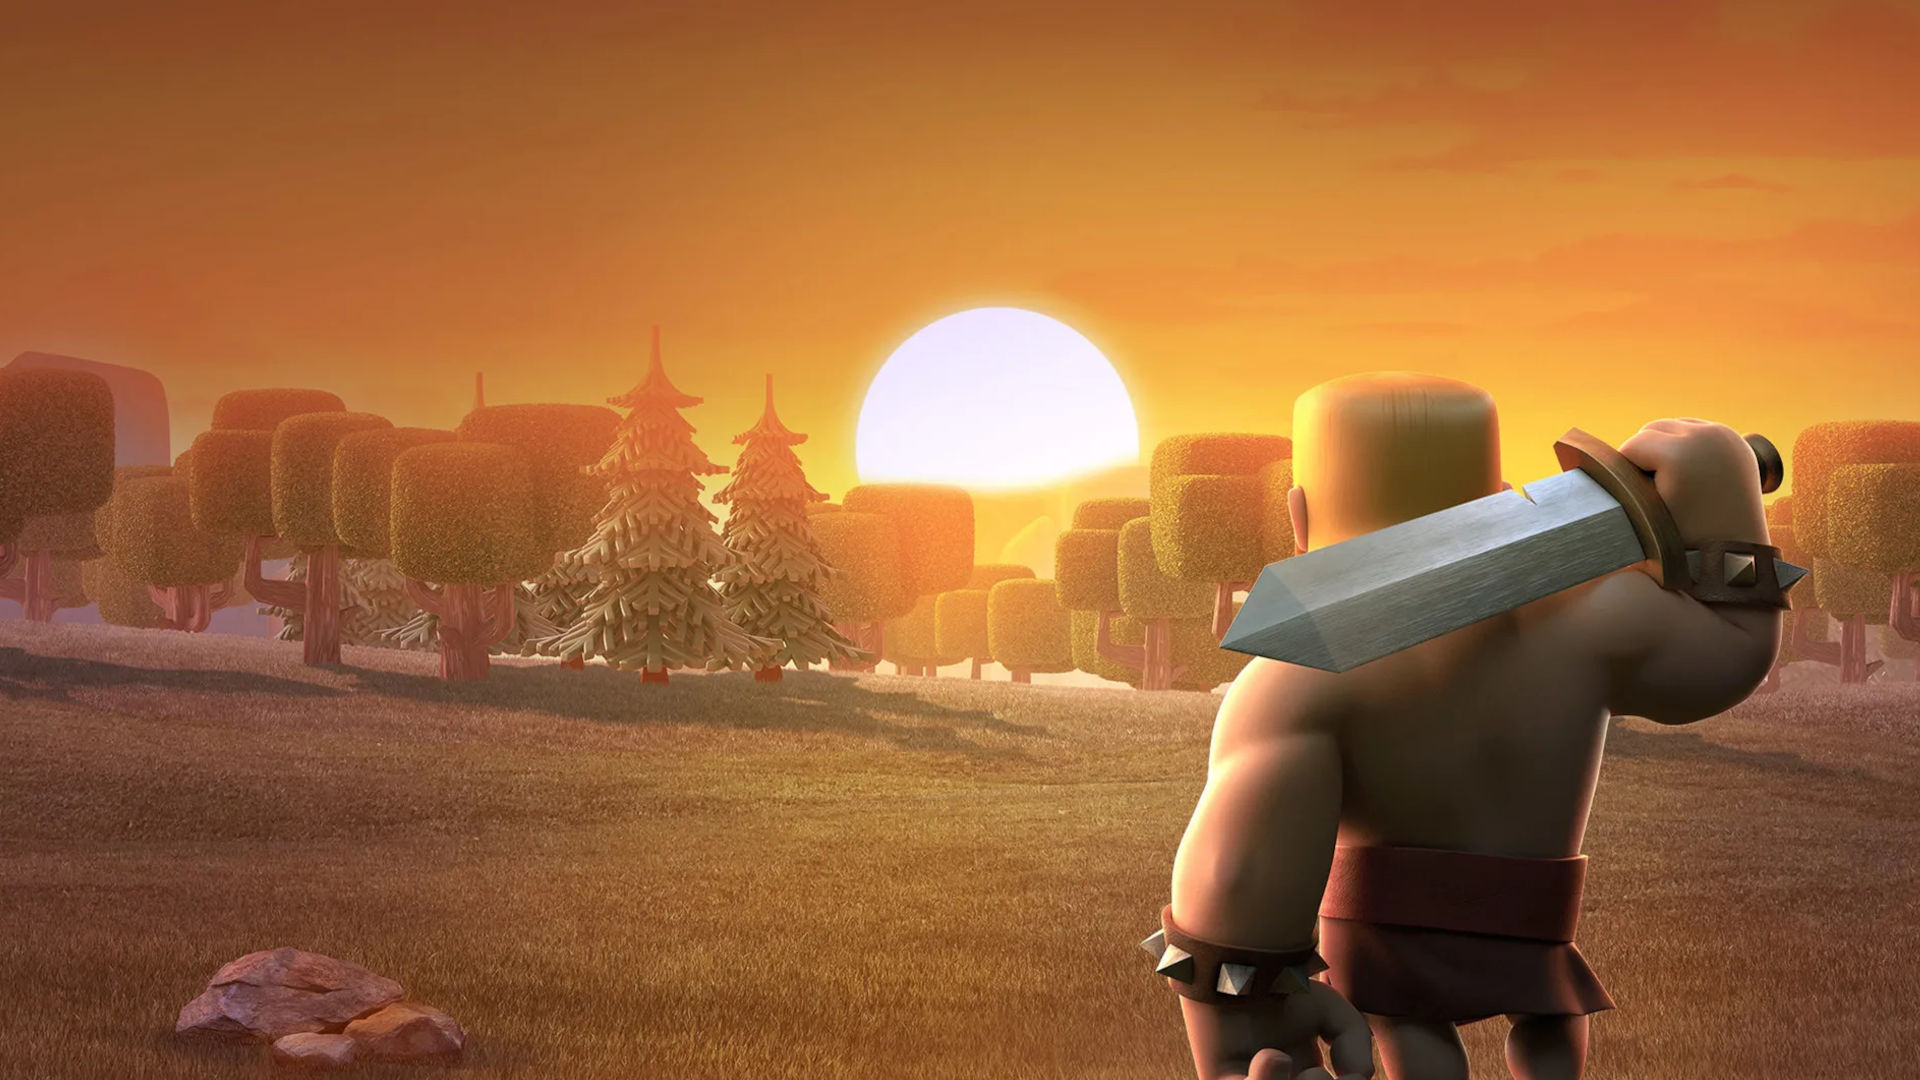 A Clash Royale troop peacefully watching a distant sunset